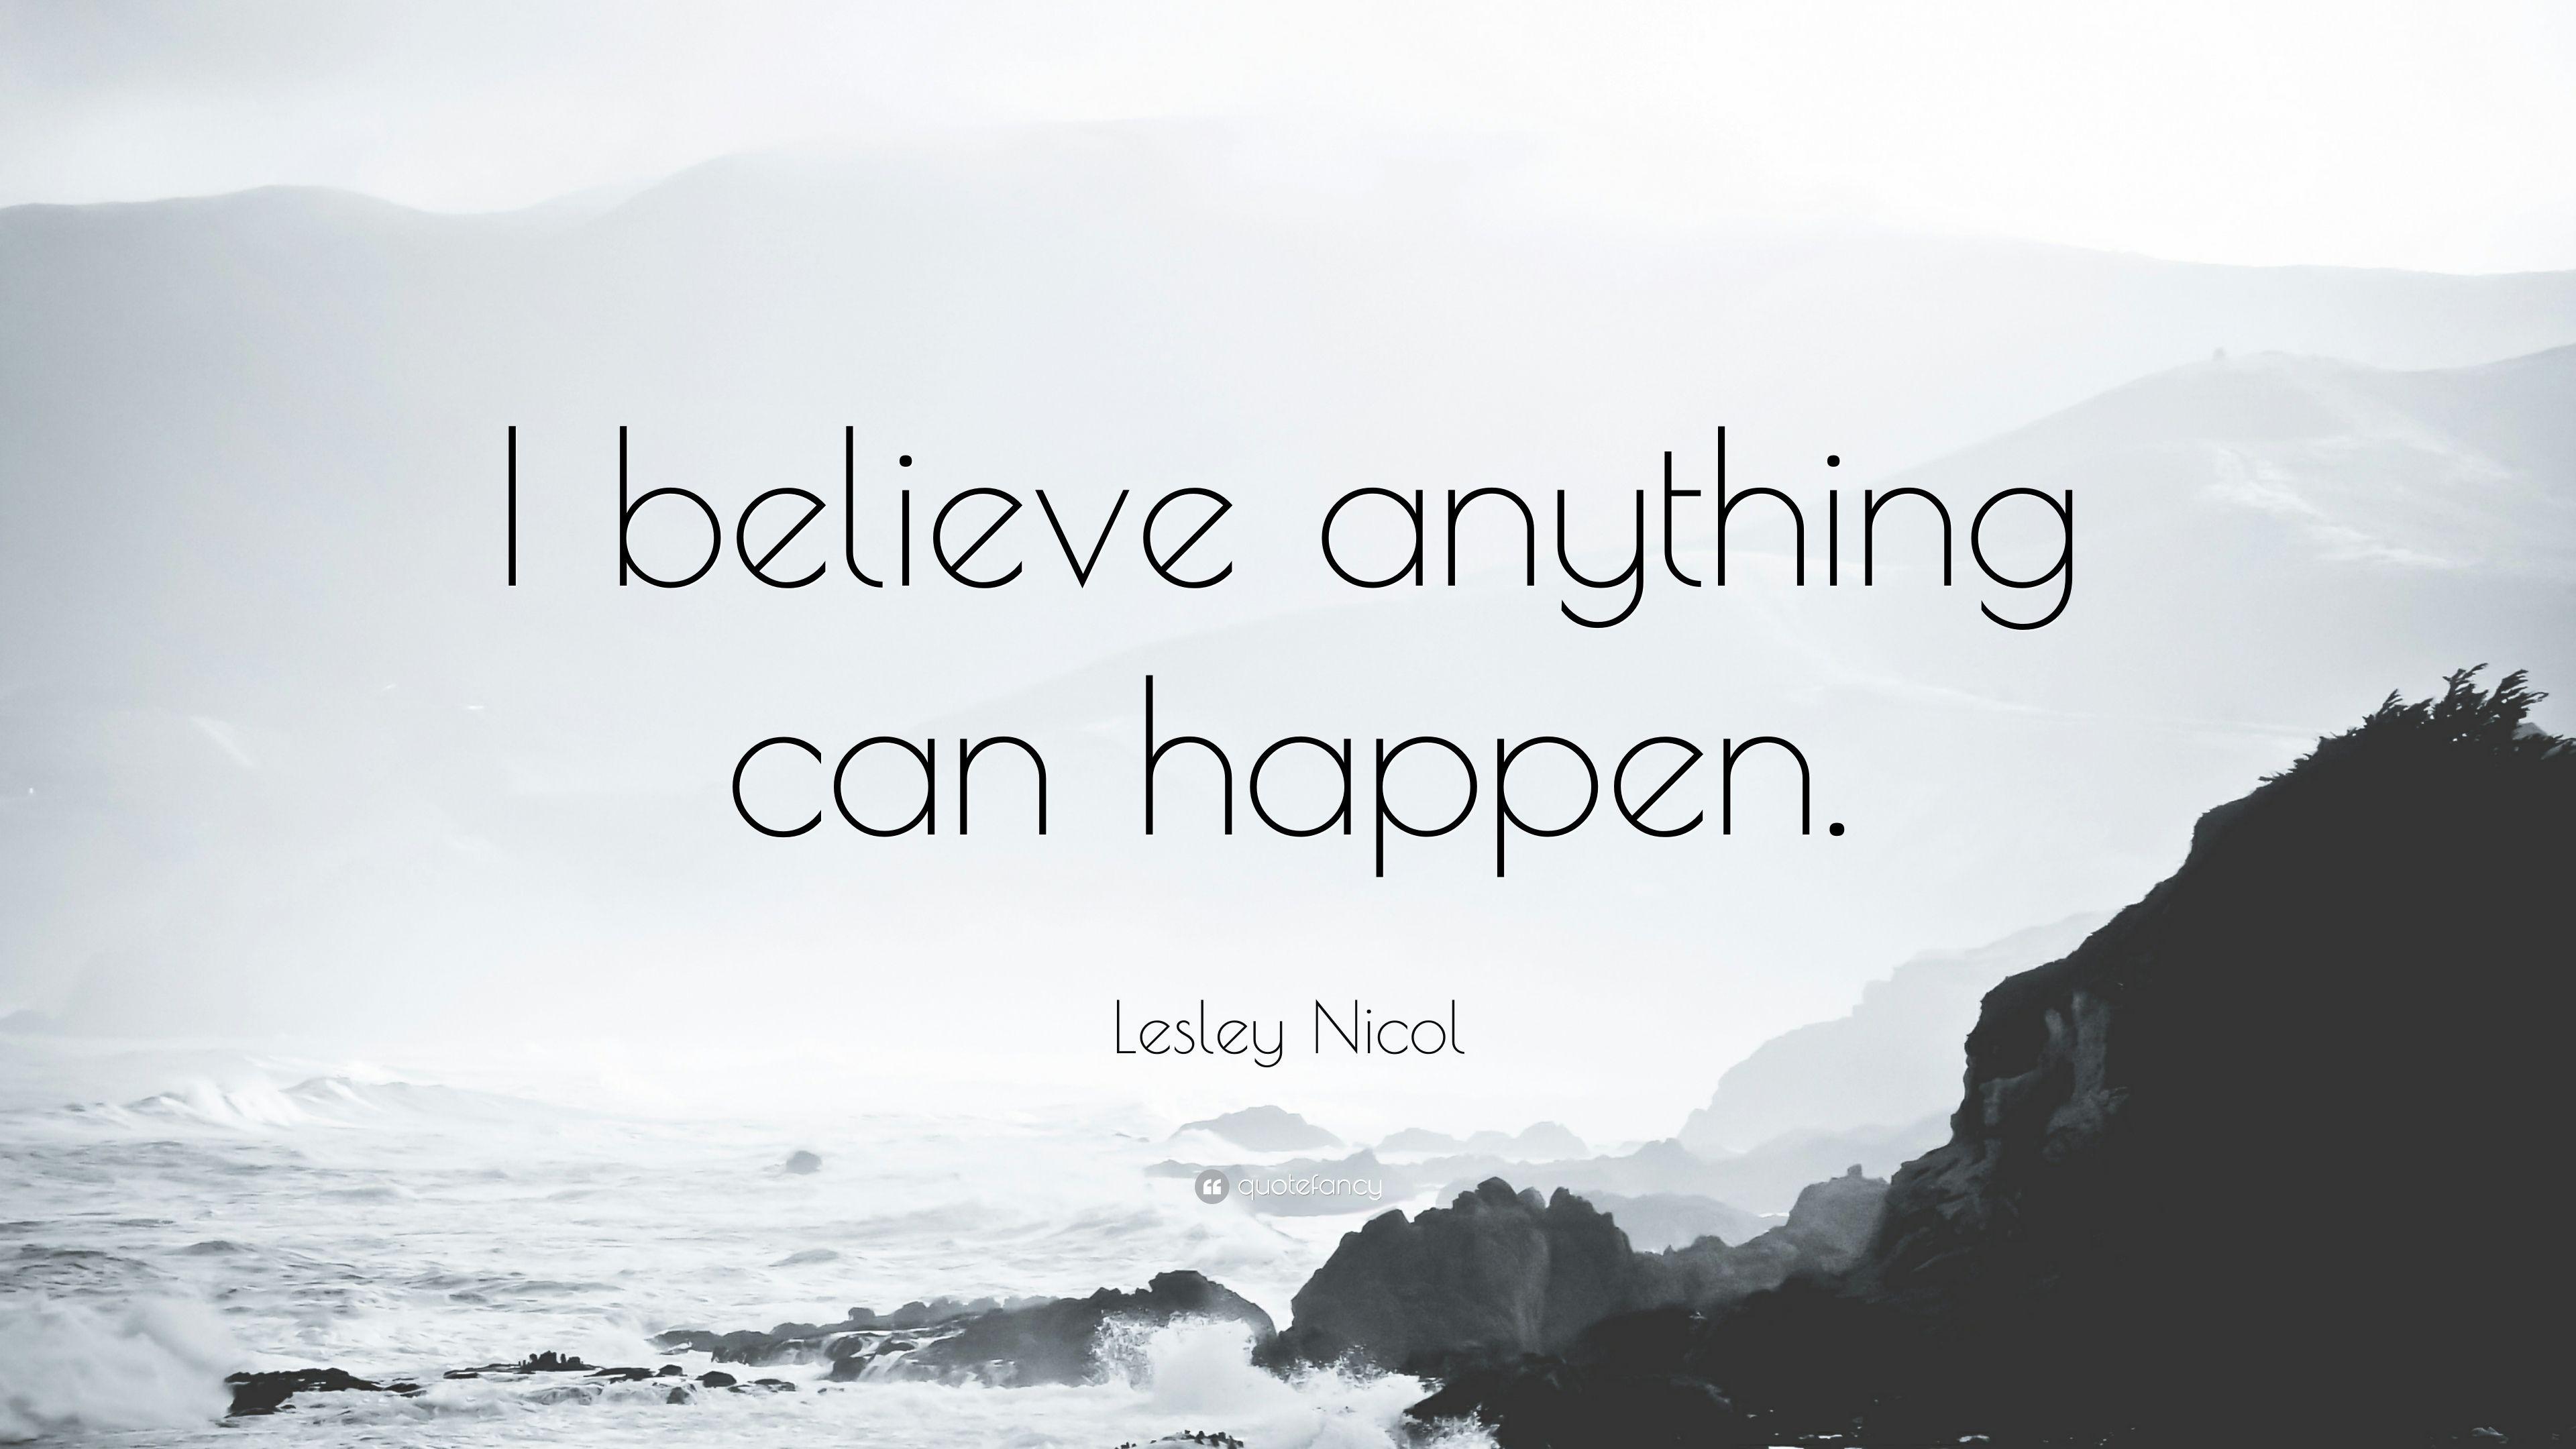 Lesley Nicol Quote: “I believe anything can happen.” 7 wallpaper